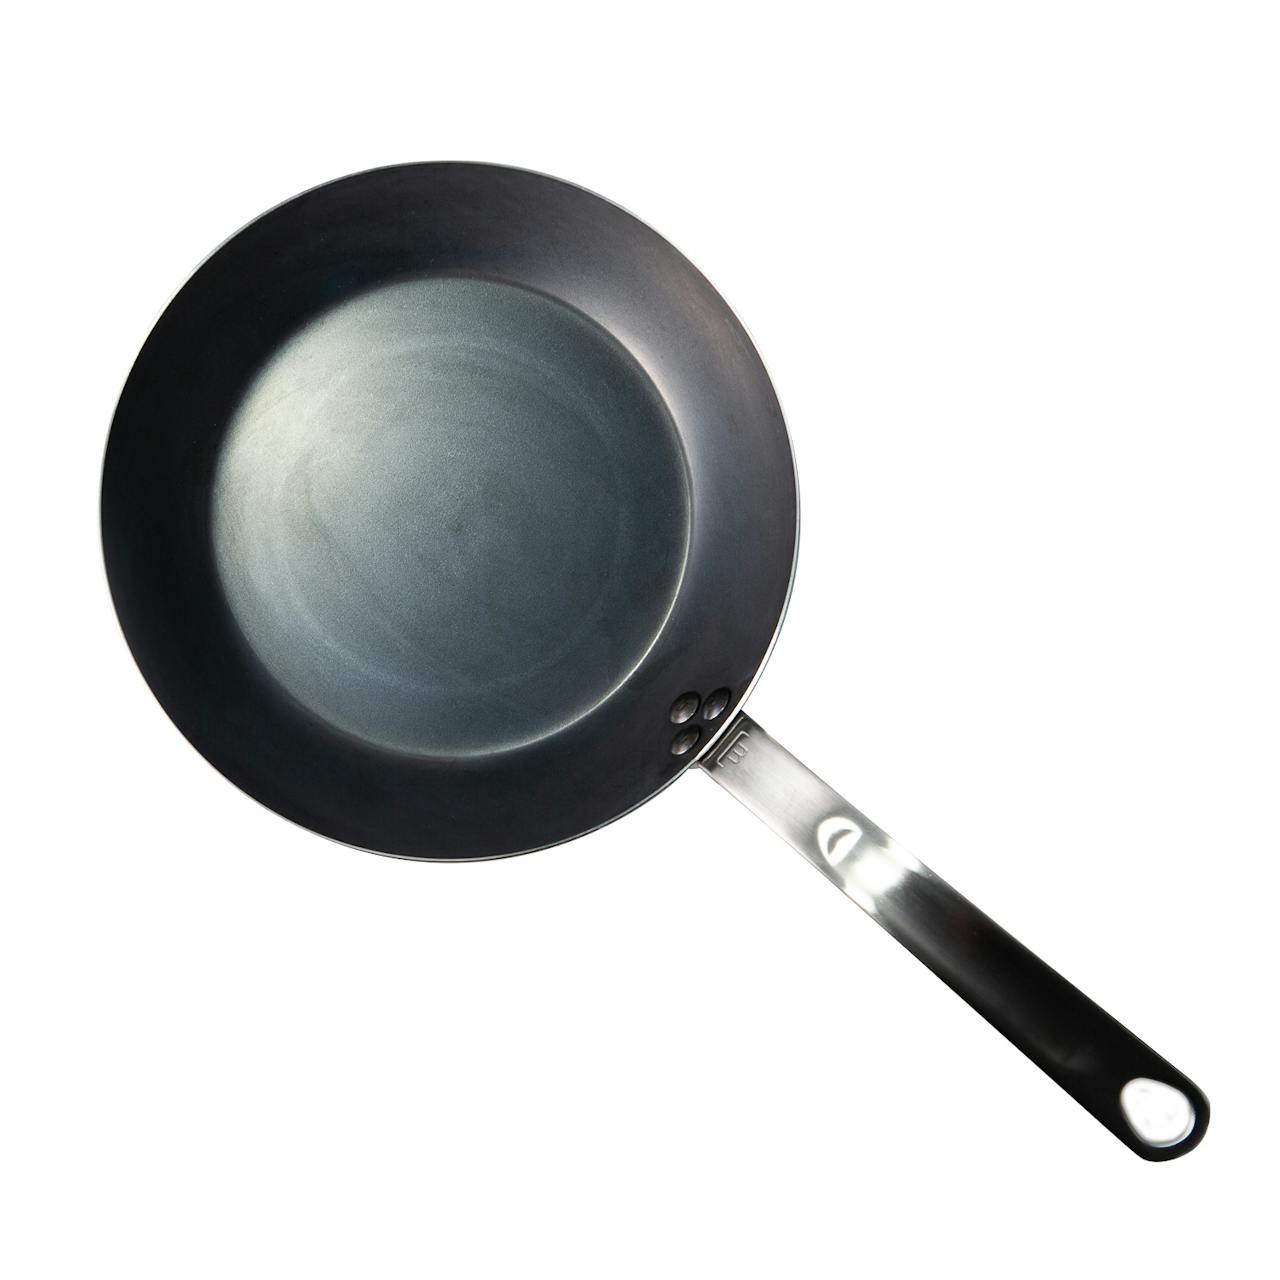 Does anyone own this pan? What makes it “blue”? Is it a good pan? : r/ carbonsteel